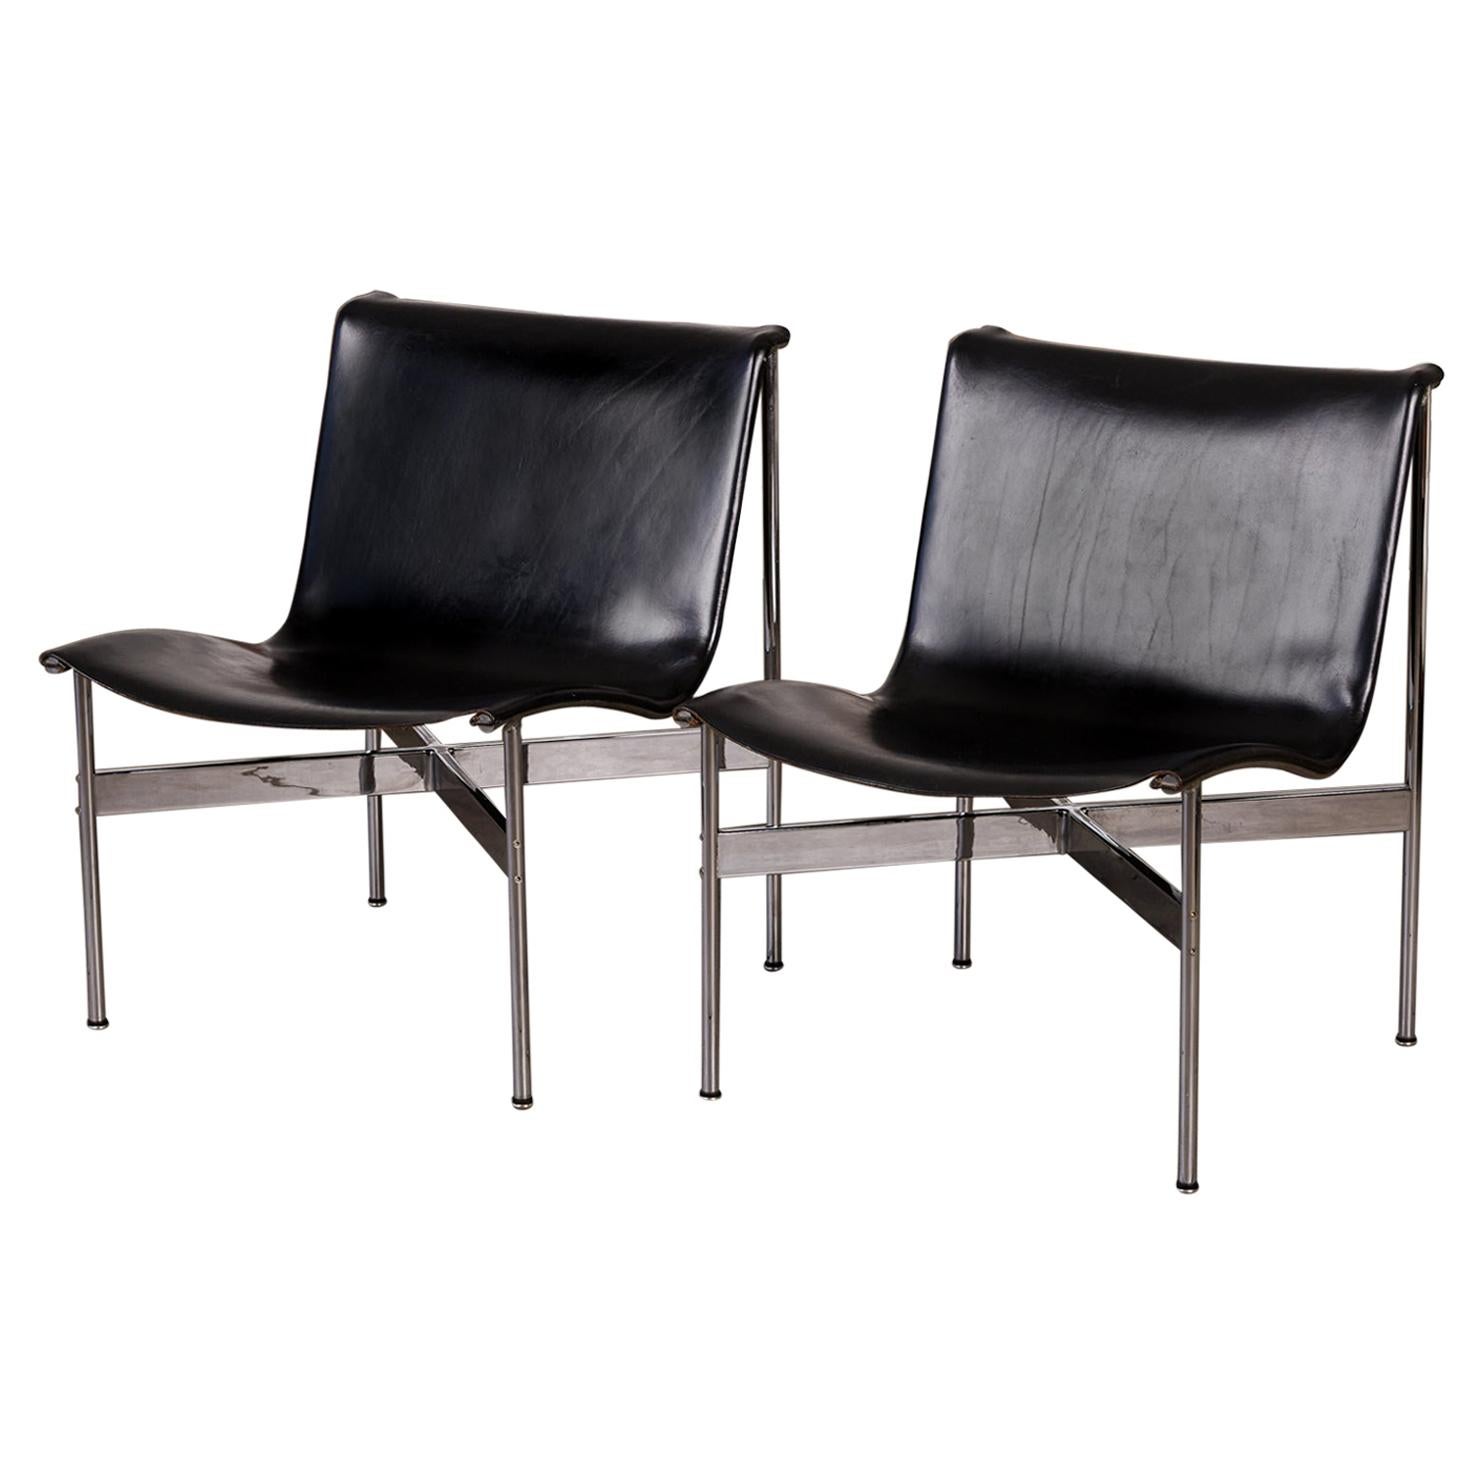 Pair of Laverne "New York" Leather Lounge Chairs